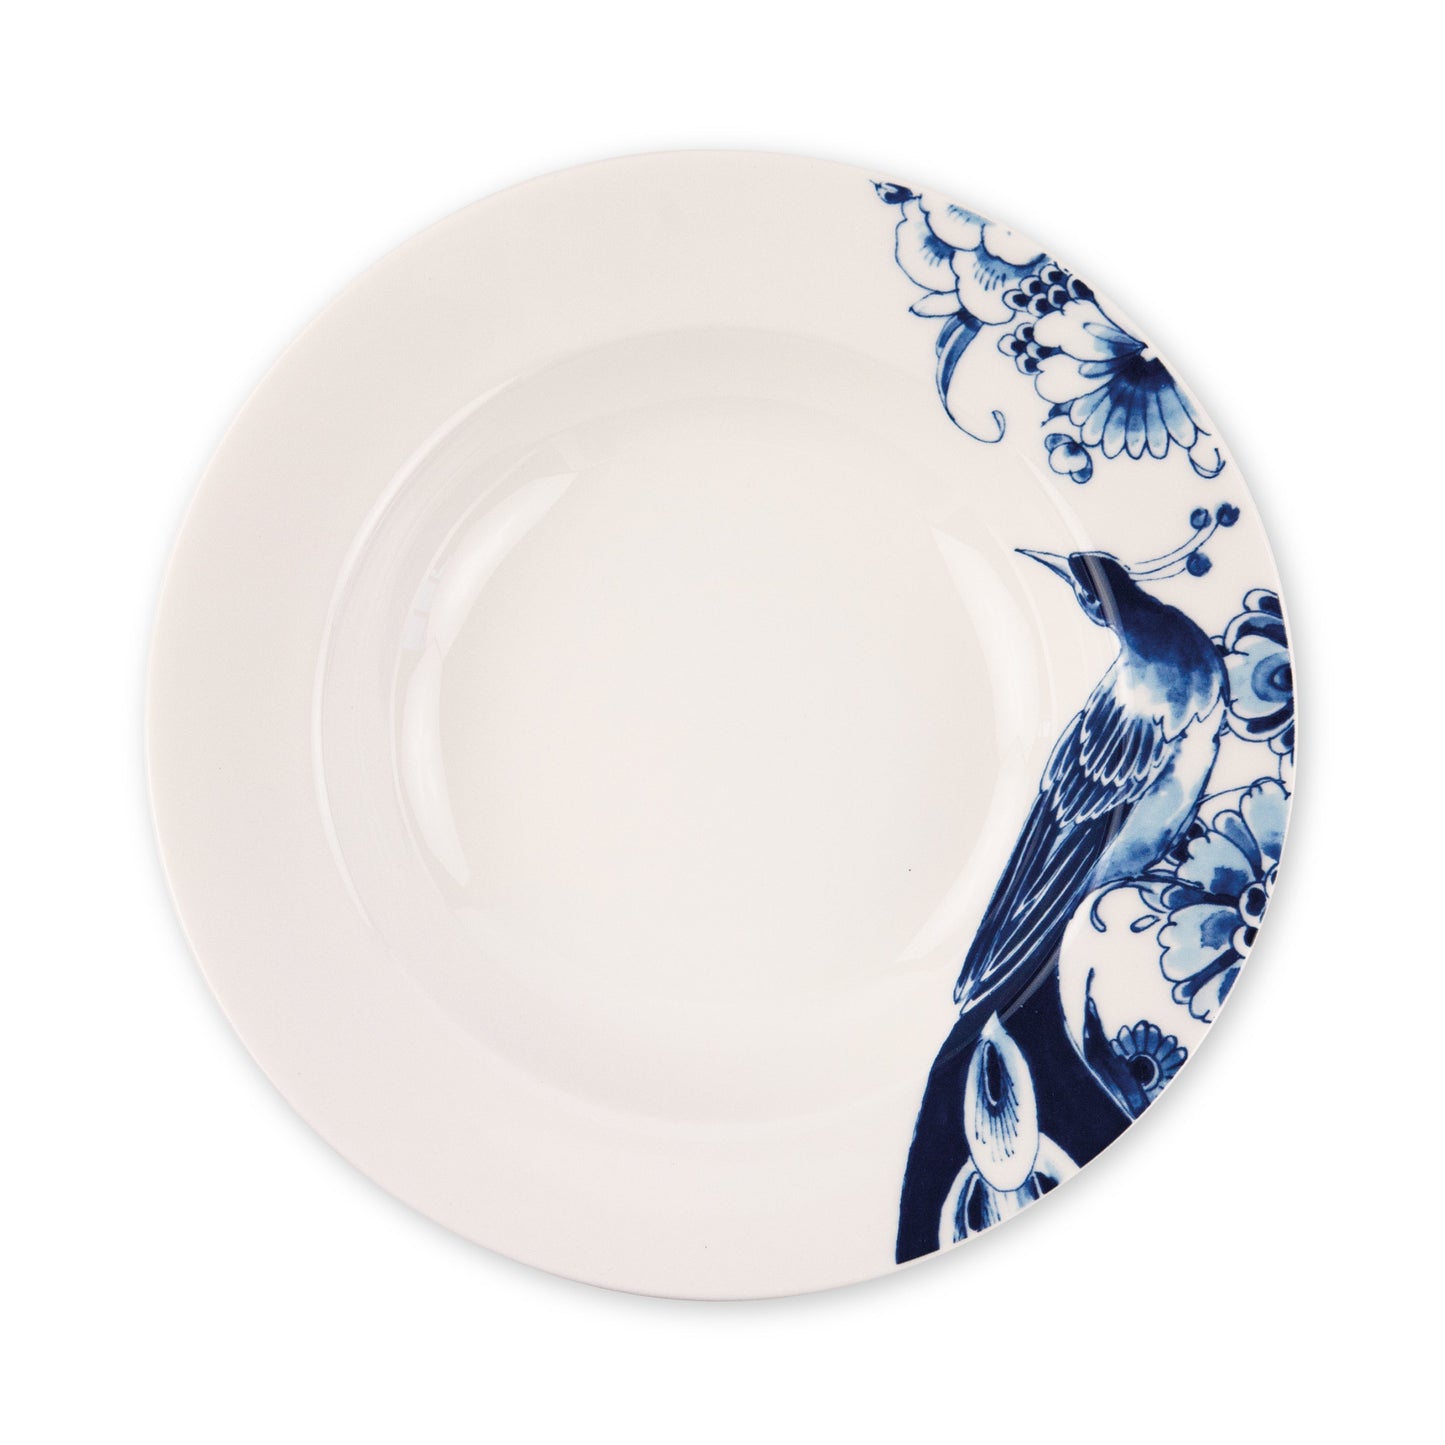 zout zonne Investeren Peacock Symphony Deep plate – Daffodils & Delft